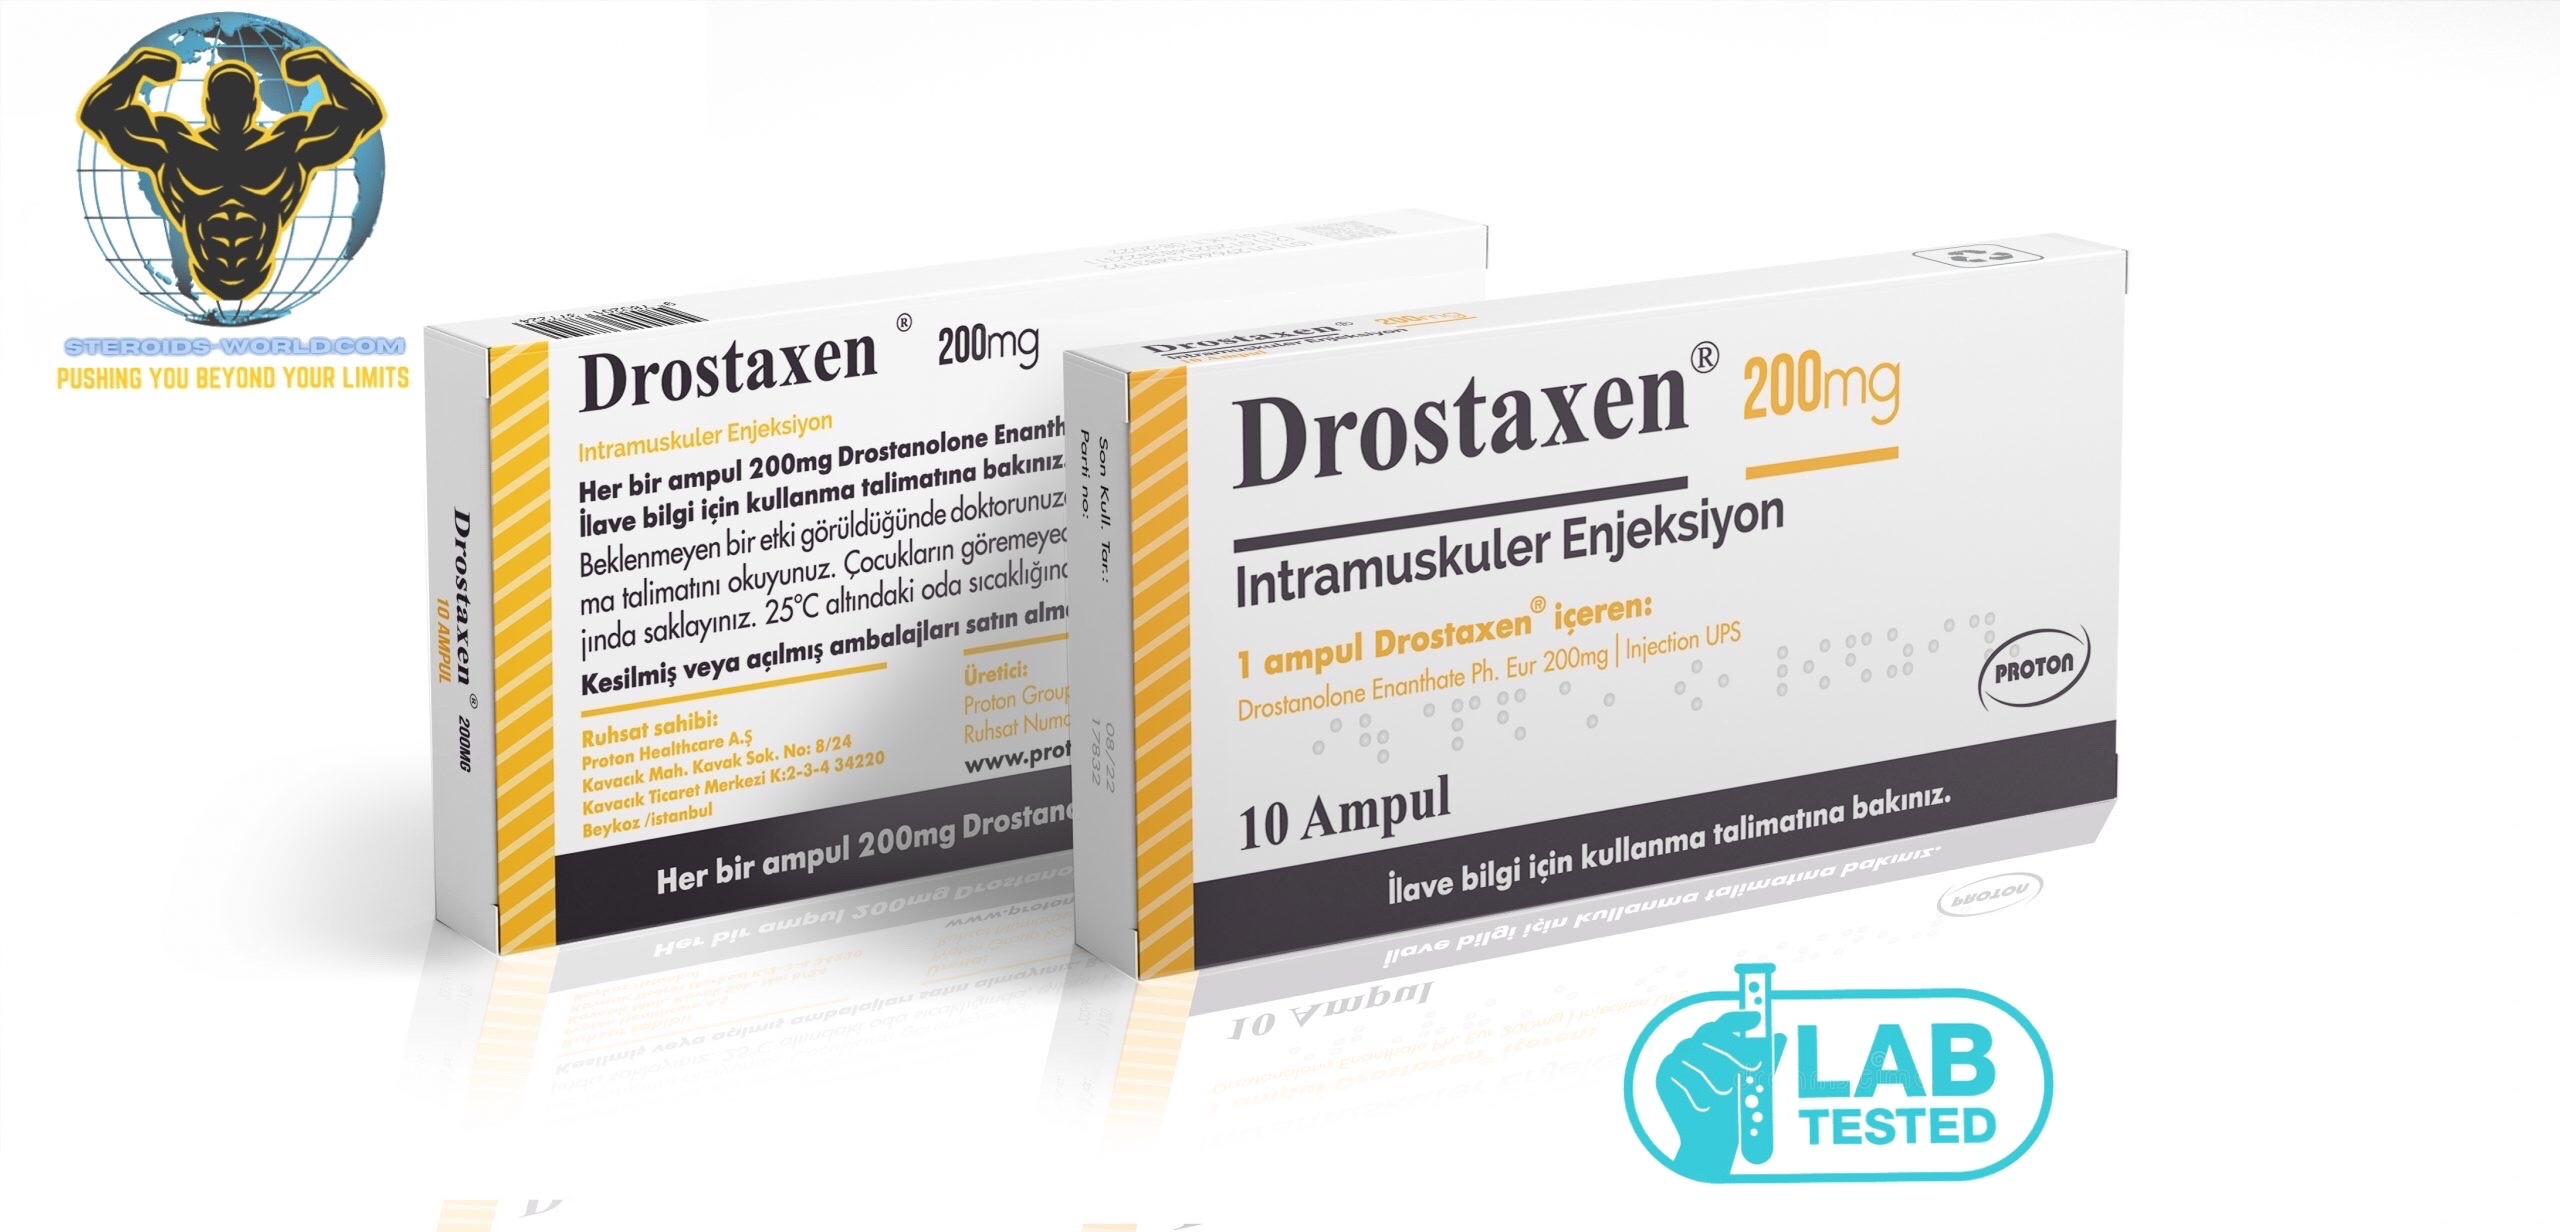 Drostanolone Enanthate 200mg